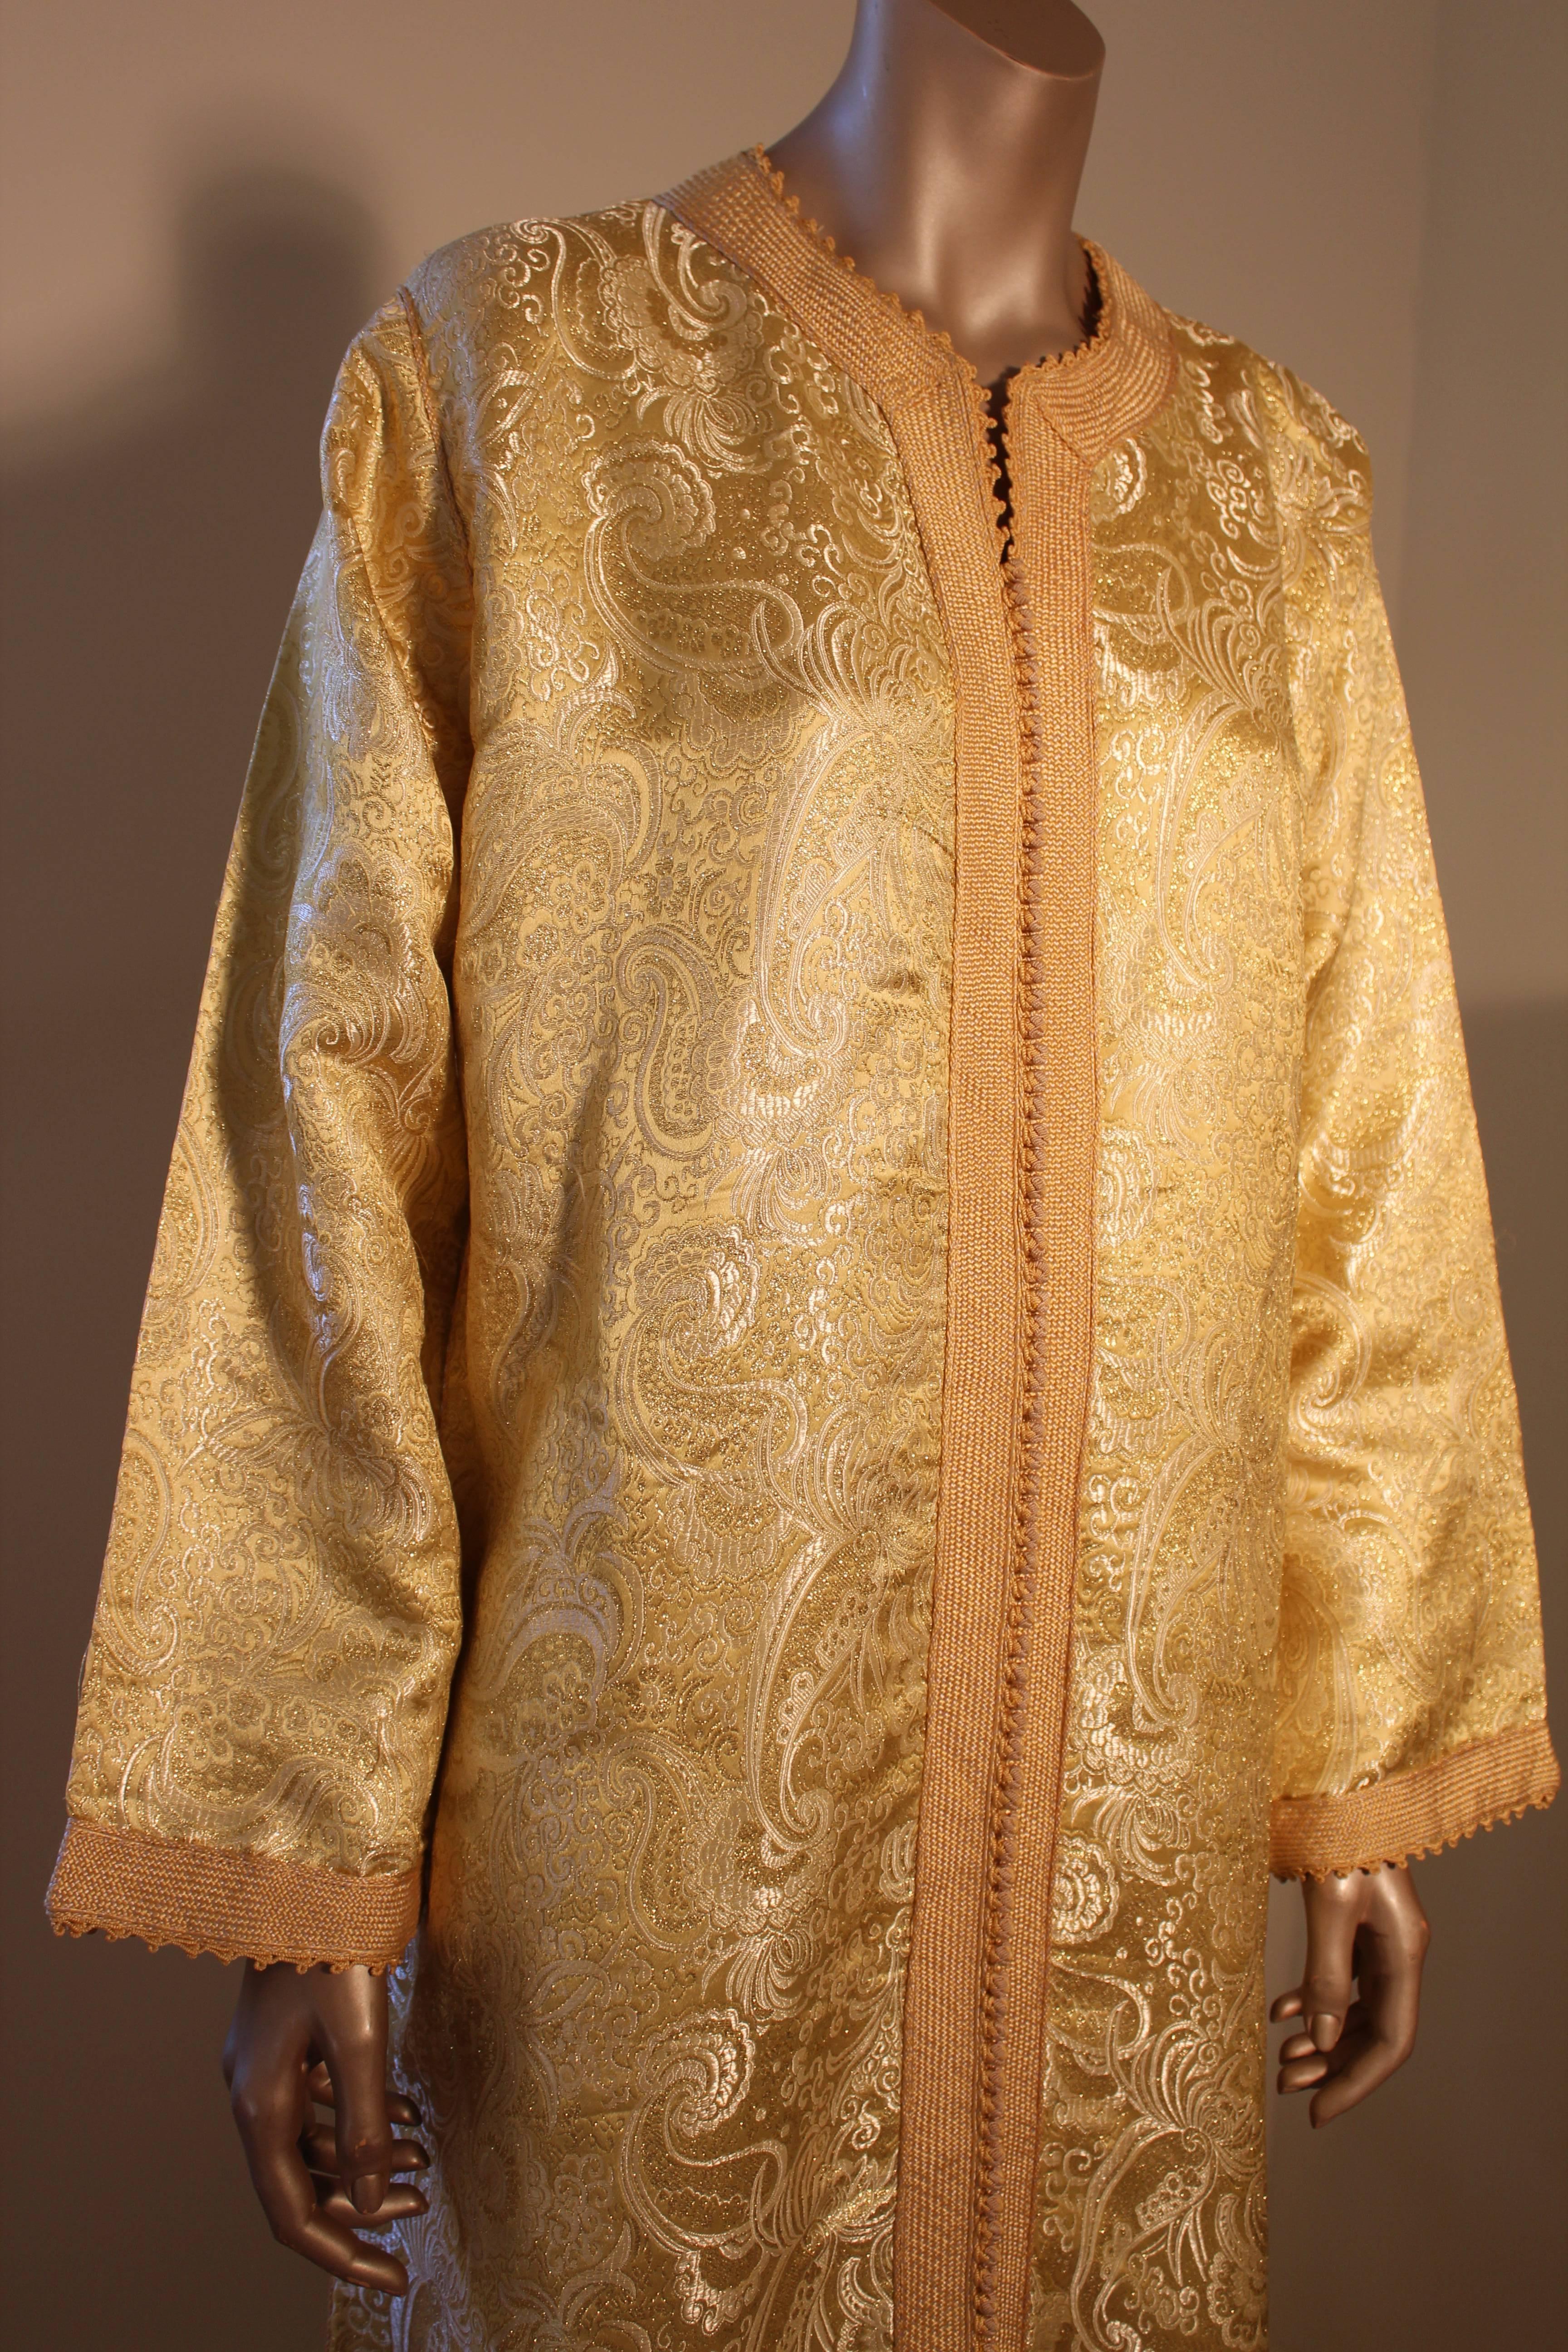 Moroccan vintage exotic gold brocade caftan gown, circa 1970s.
The luxurious kaftan is designed with brilliant gold metallic fabric.
The front of the elegant Kaftan gown is embellished at the front with woven gold buttons and loops that run down the